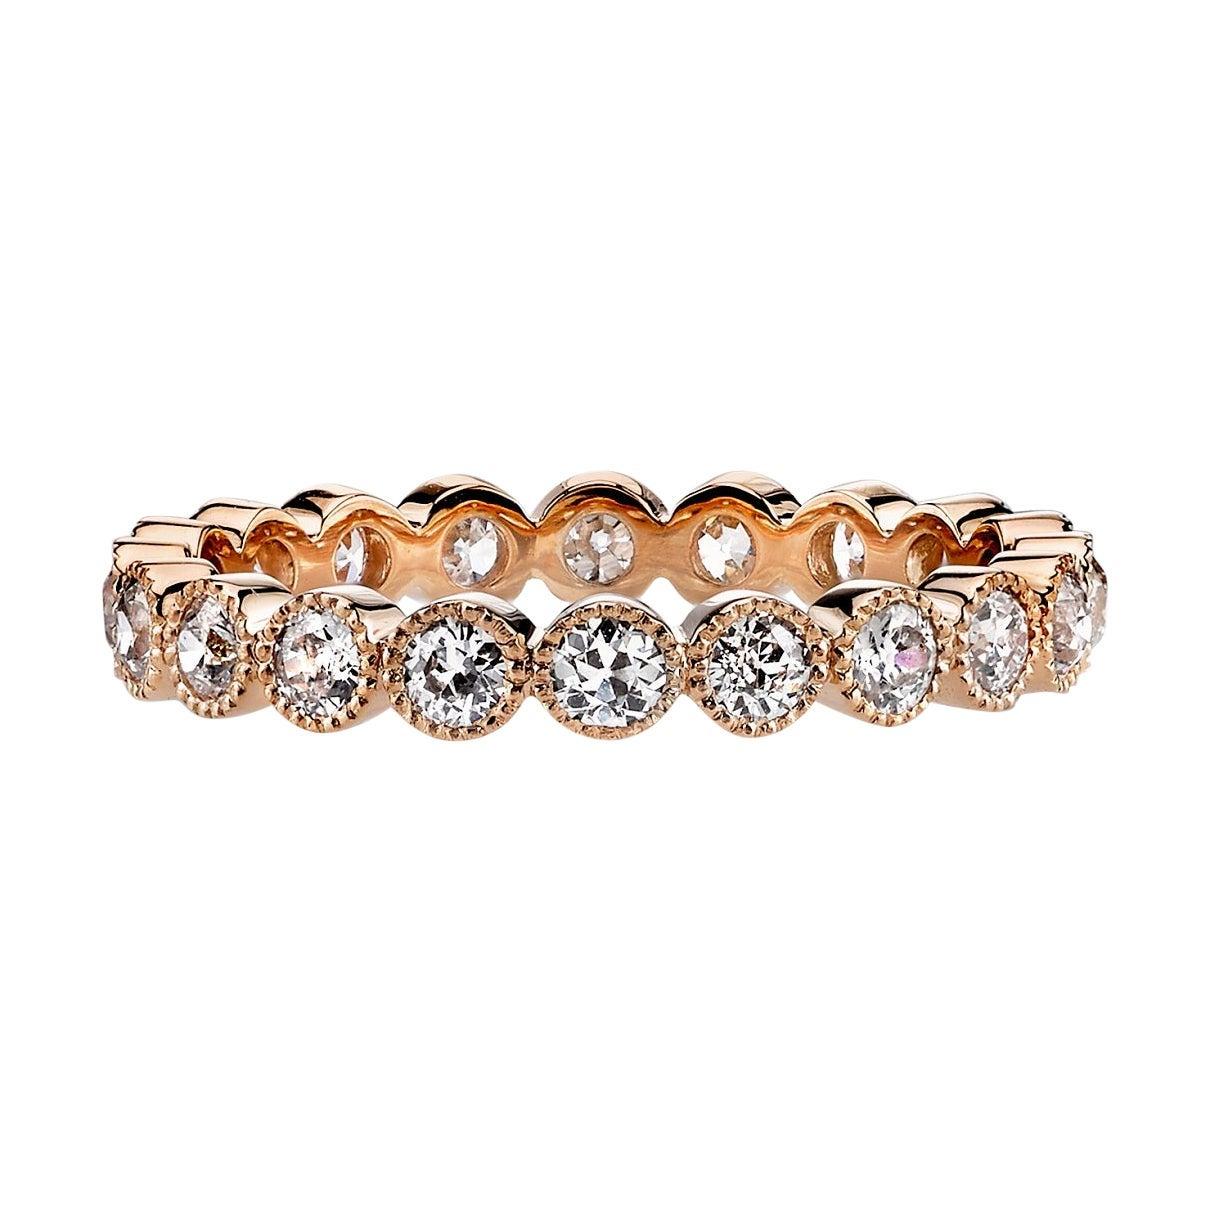 For Sale:  Handcrafted Gabby Old European Cut Diamond Eternity Band by Single Stone